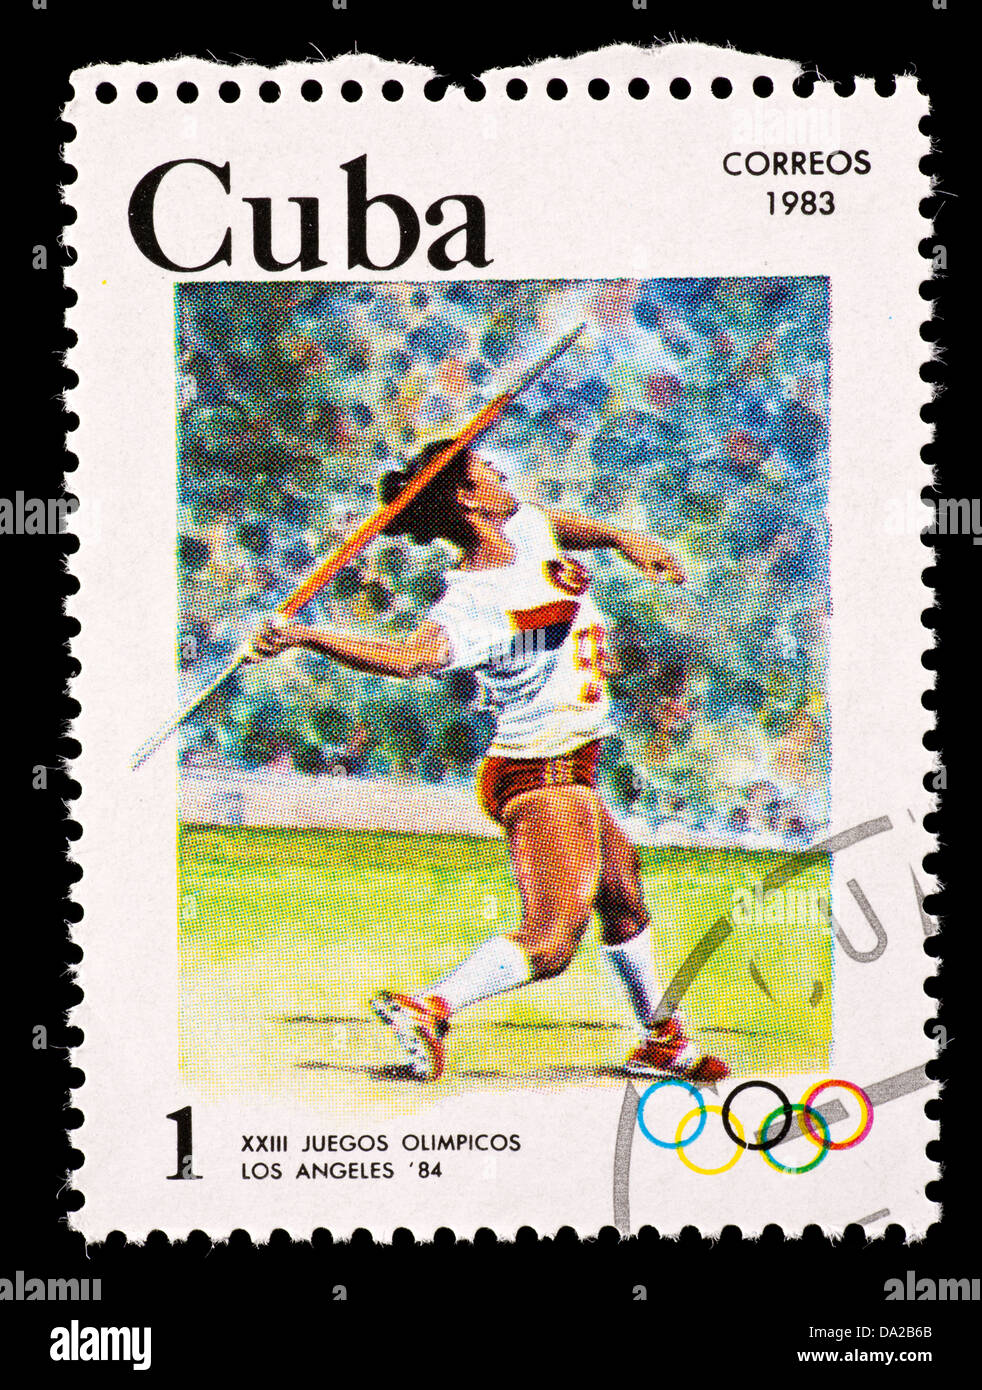 Postage stamp from Cuba depicting a javelin thrower, issued for the 1984 Summer Olympic Games in Los Angeles. Stock Photo